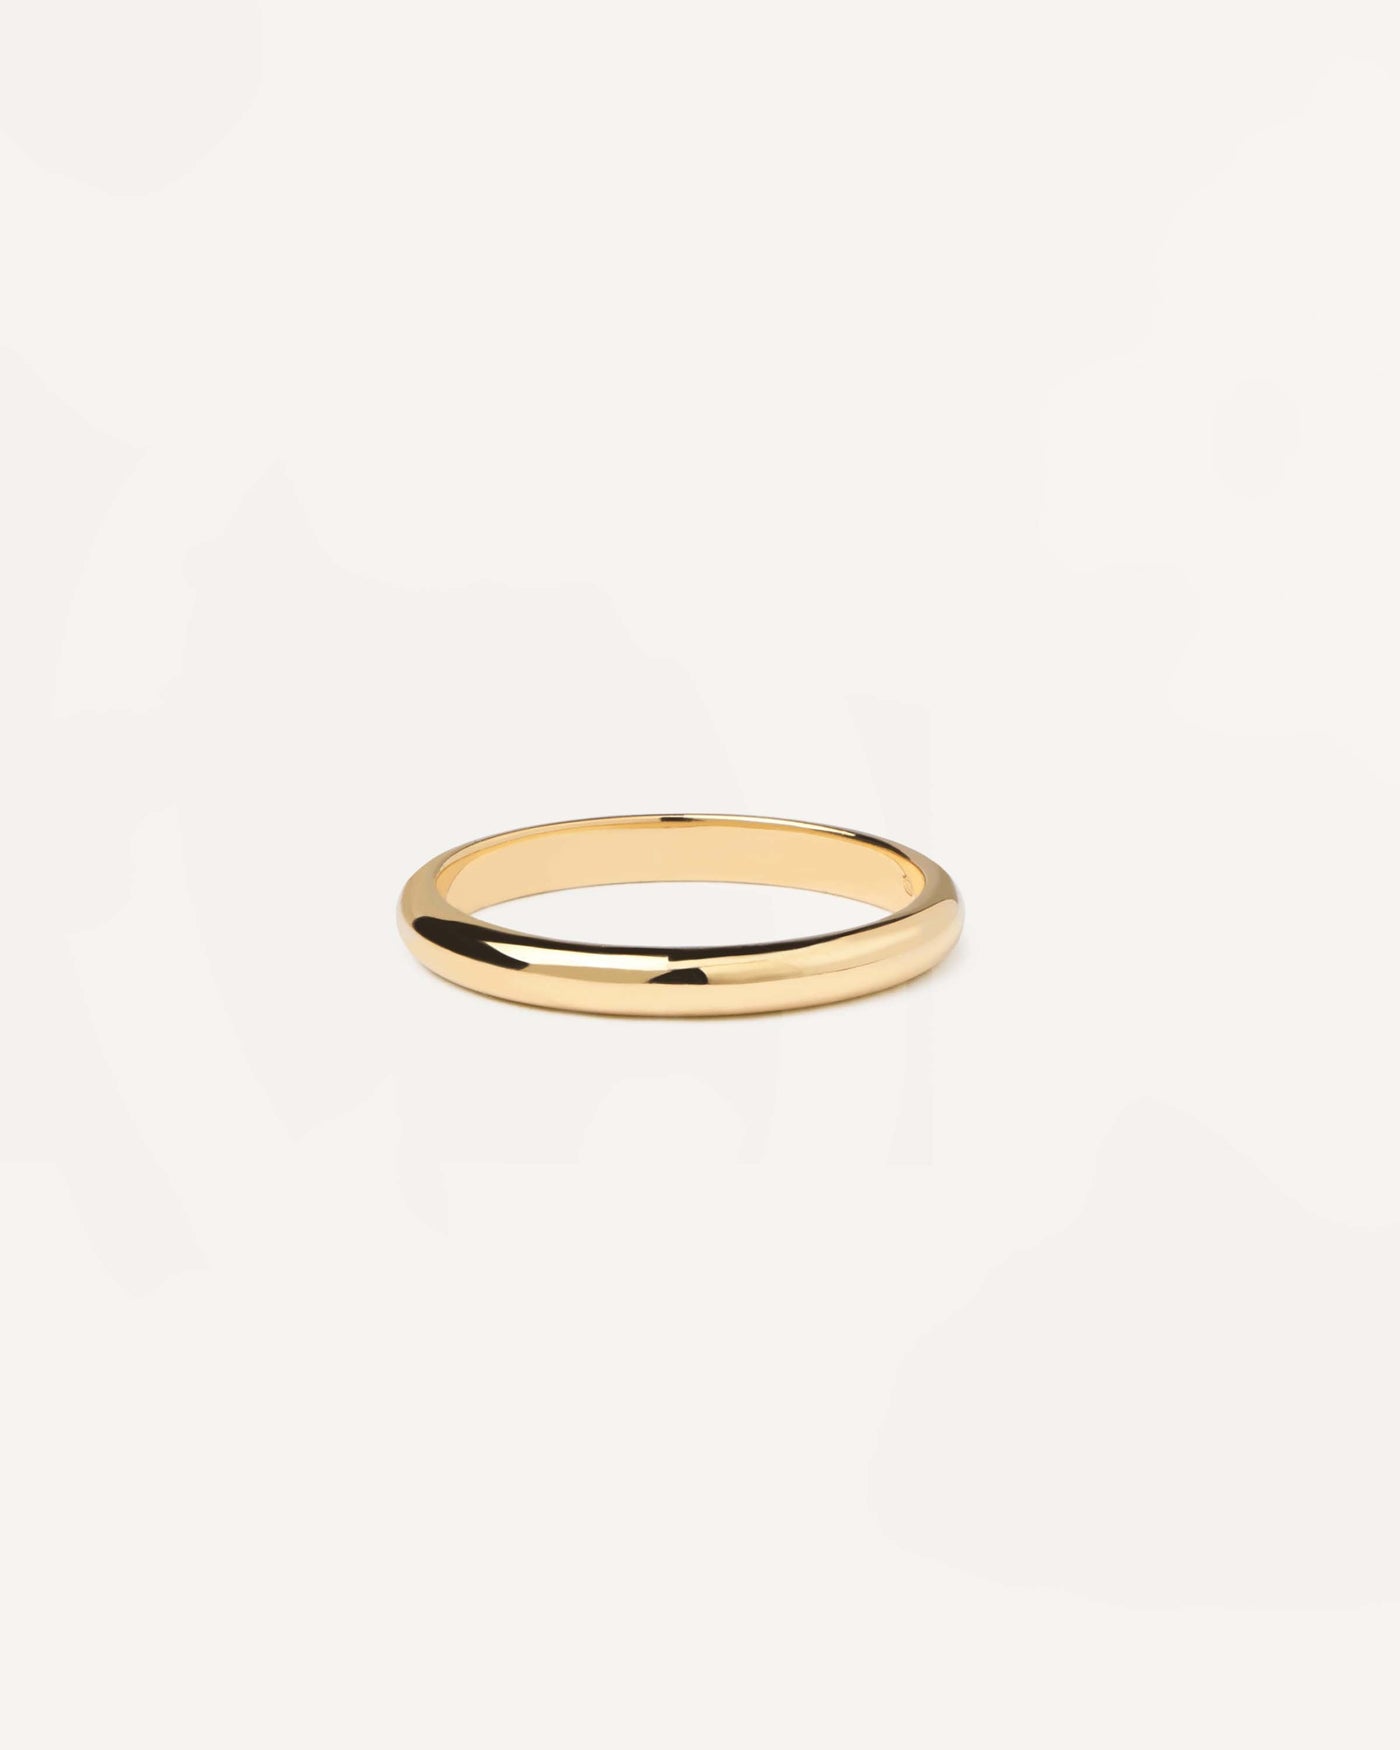 Buy 18K Recycled Gold and Lab-grown diamonds ring. High-end materials with a lifetime personal assistance. Free Shipping.